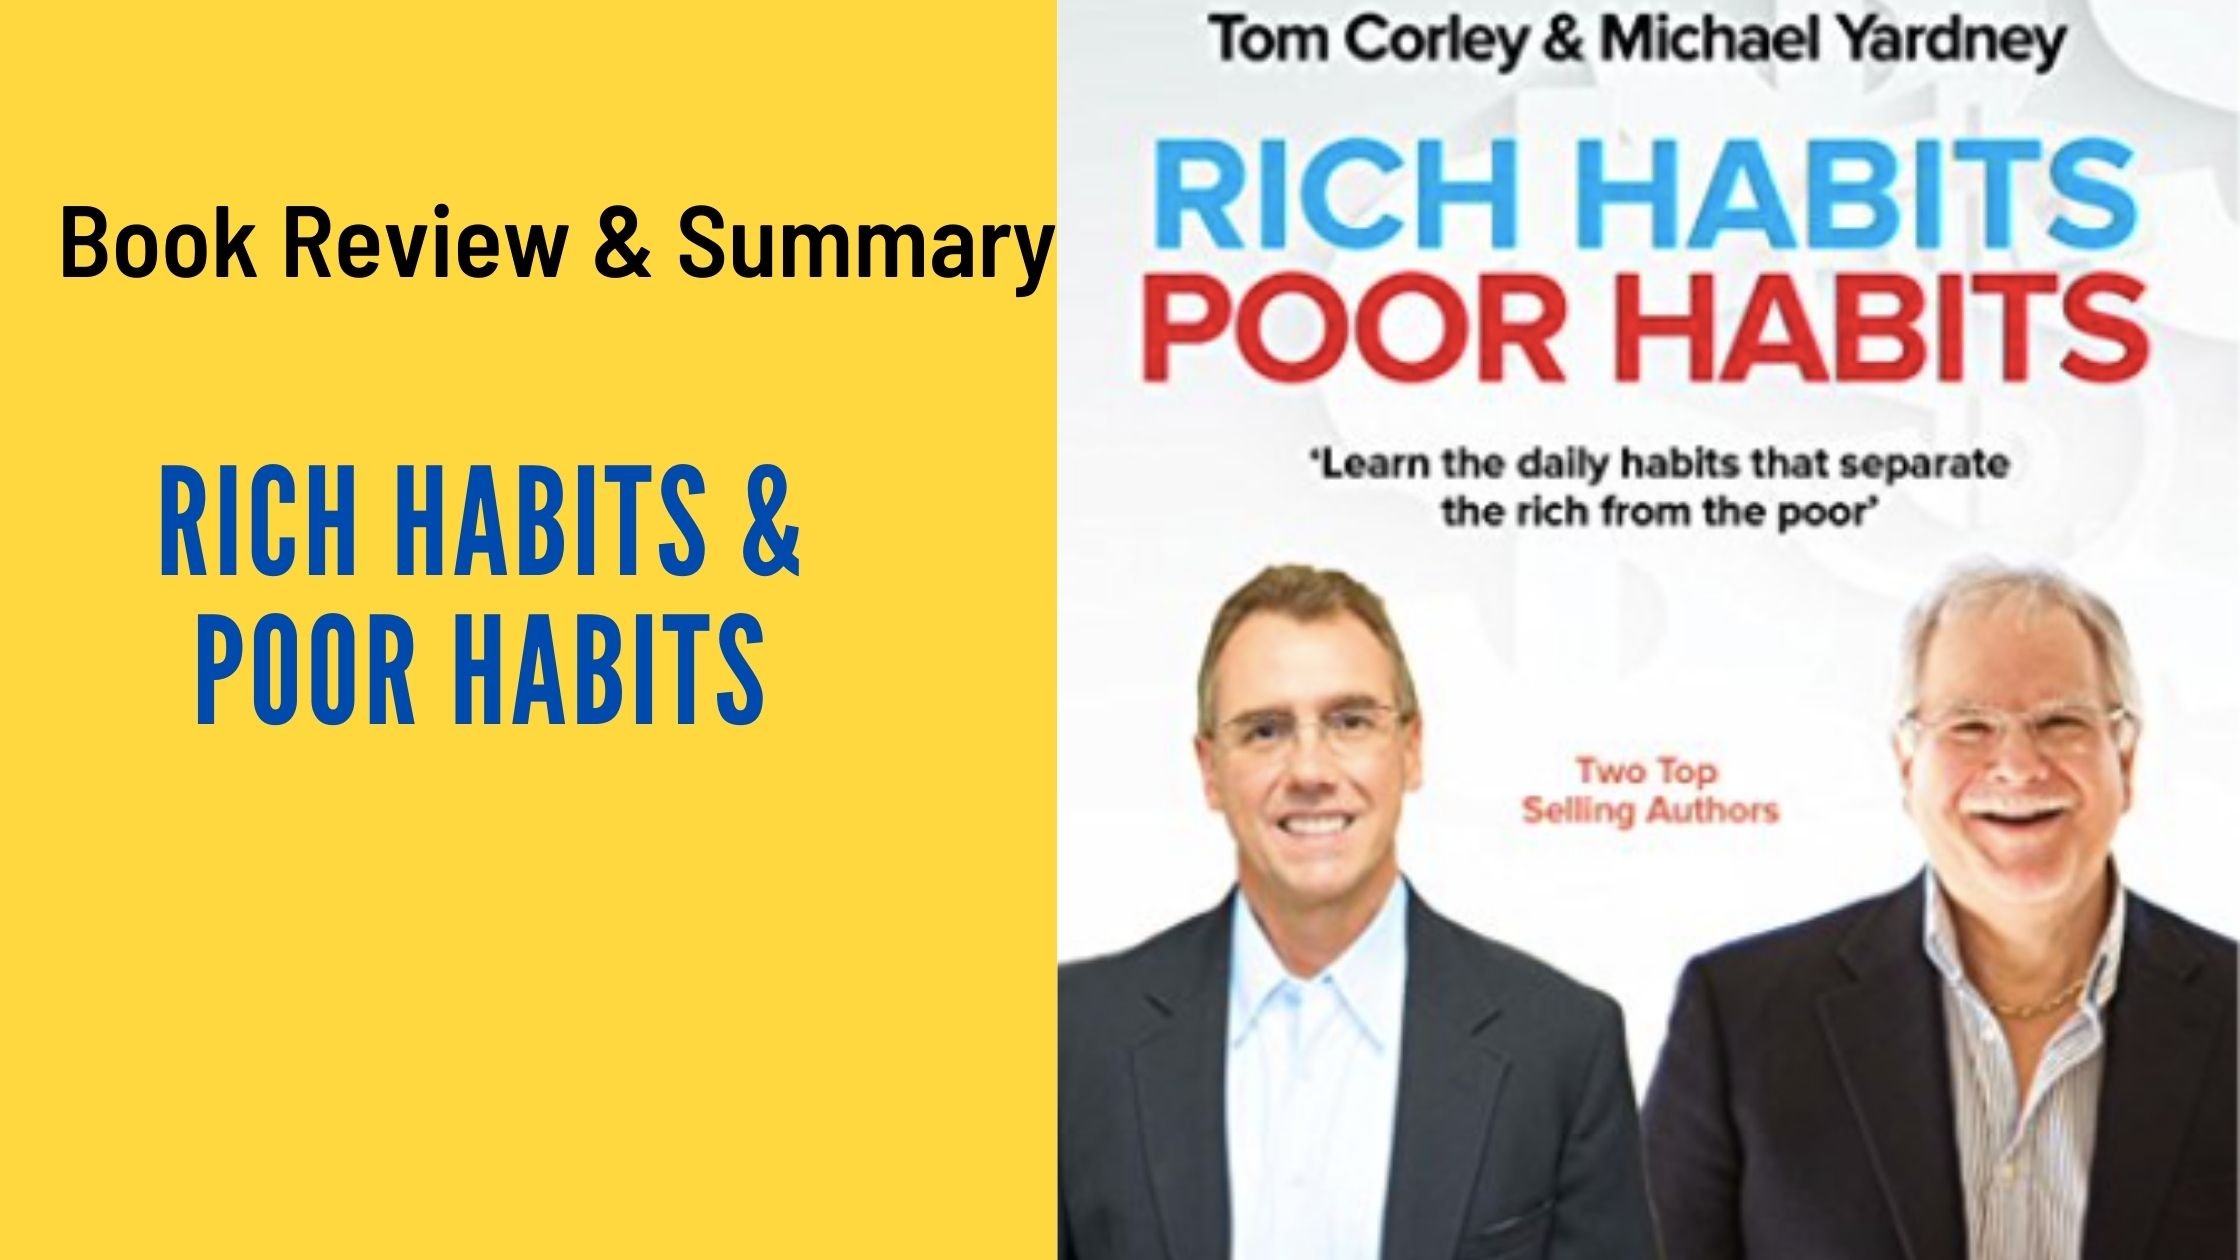 Book Review & Summary: Rich Habits & Poor Habits